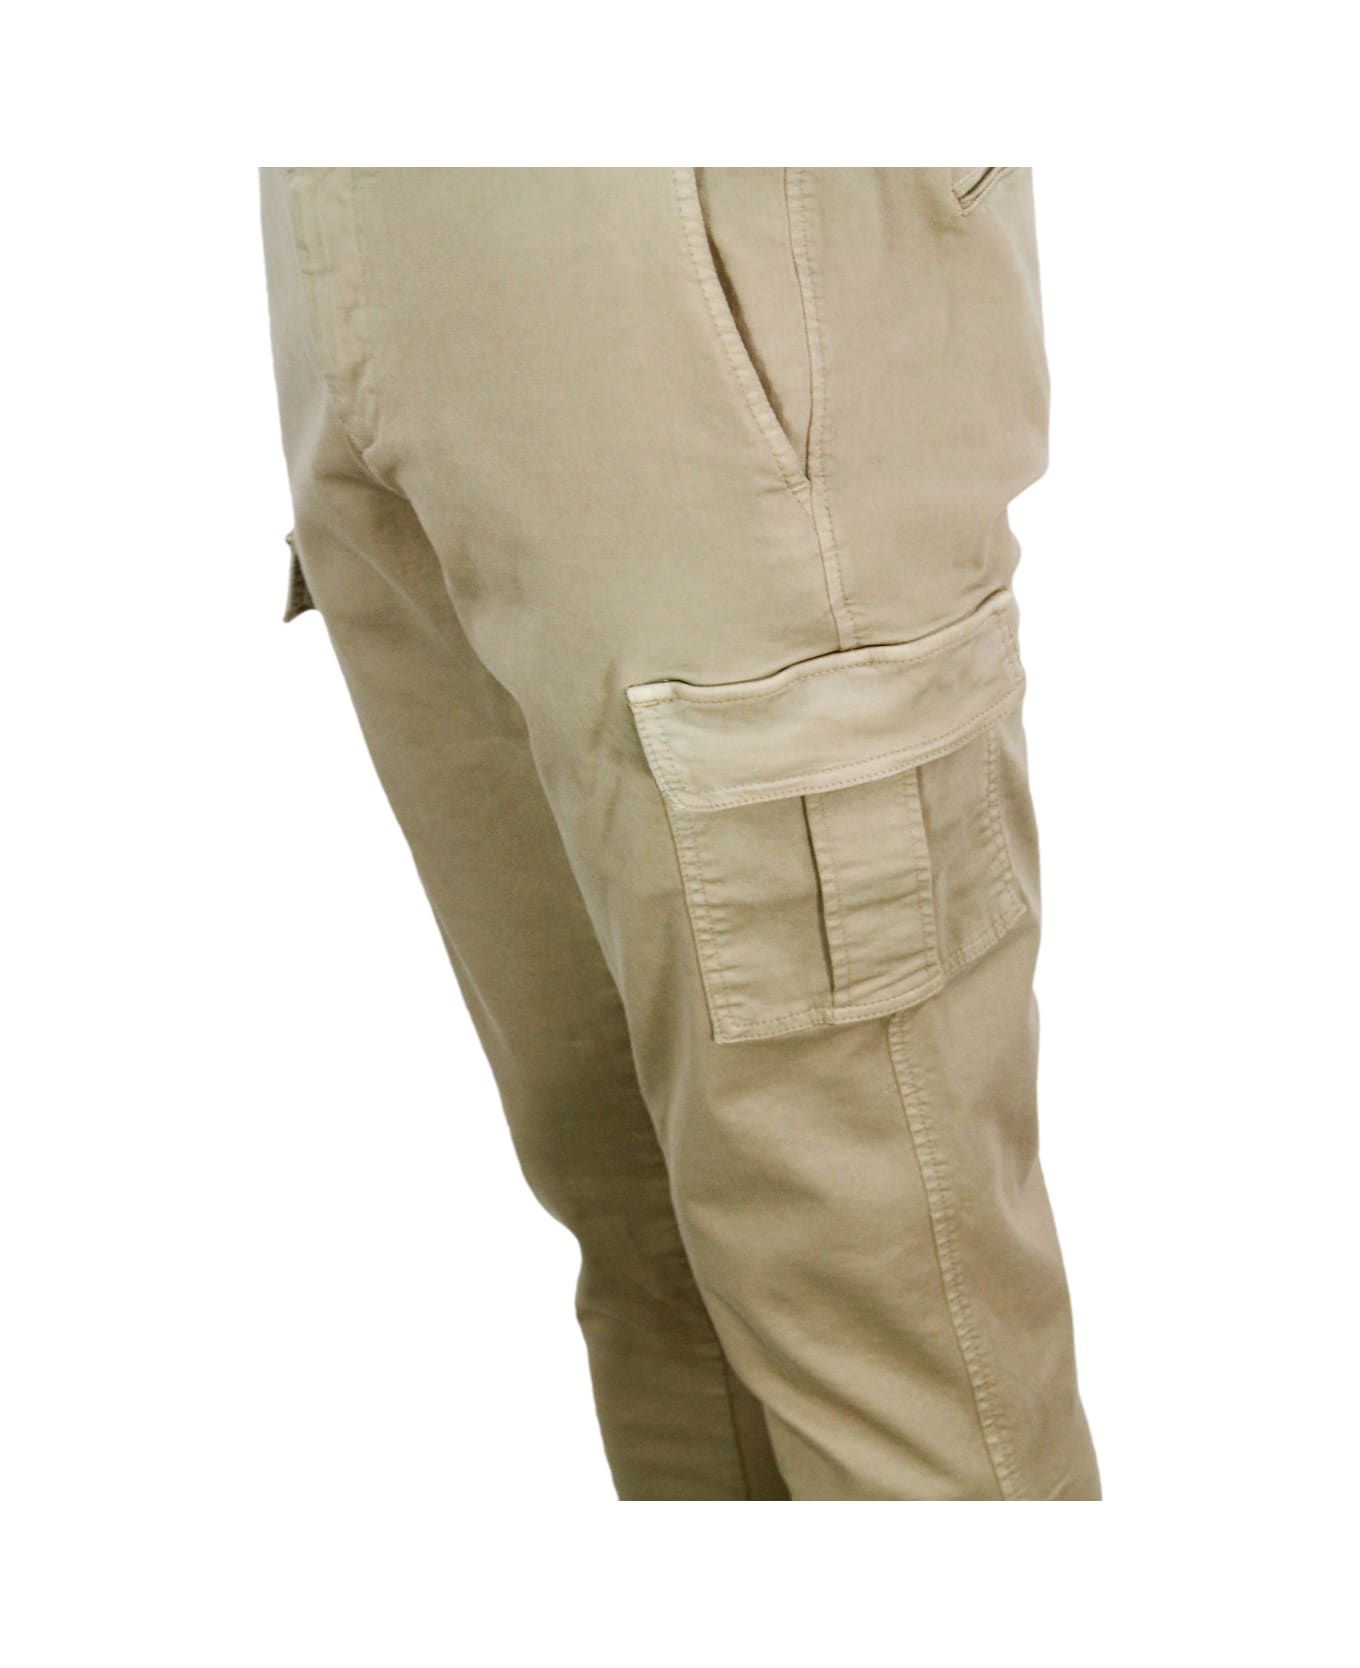 Sartoria Tramarossa Amerigo Acargo Model Trousers With Large Slim Zip Pockets In Soft Cotton With Chino Pockets And Tailored Stitching And Suede Tassel. Zip And Button Cl - Beige